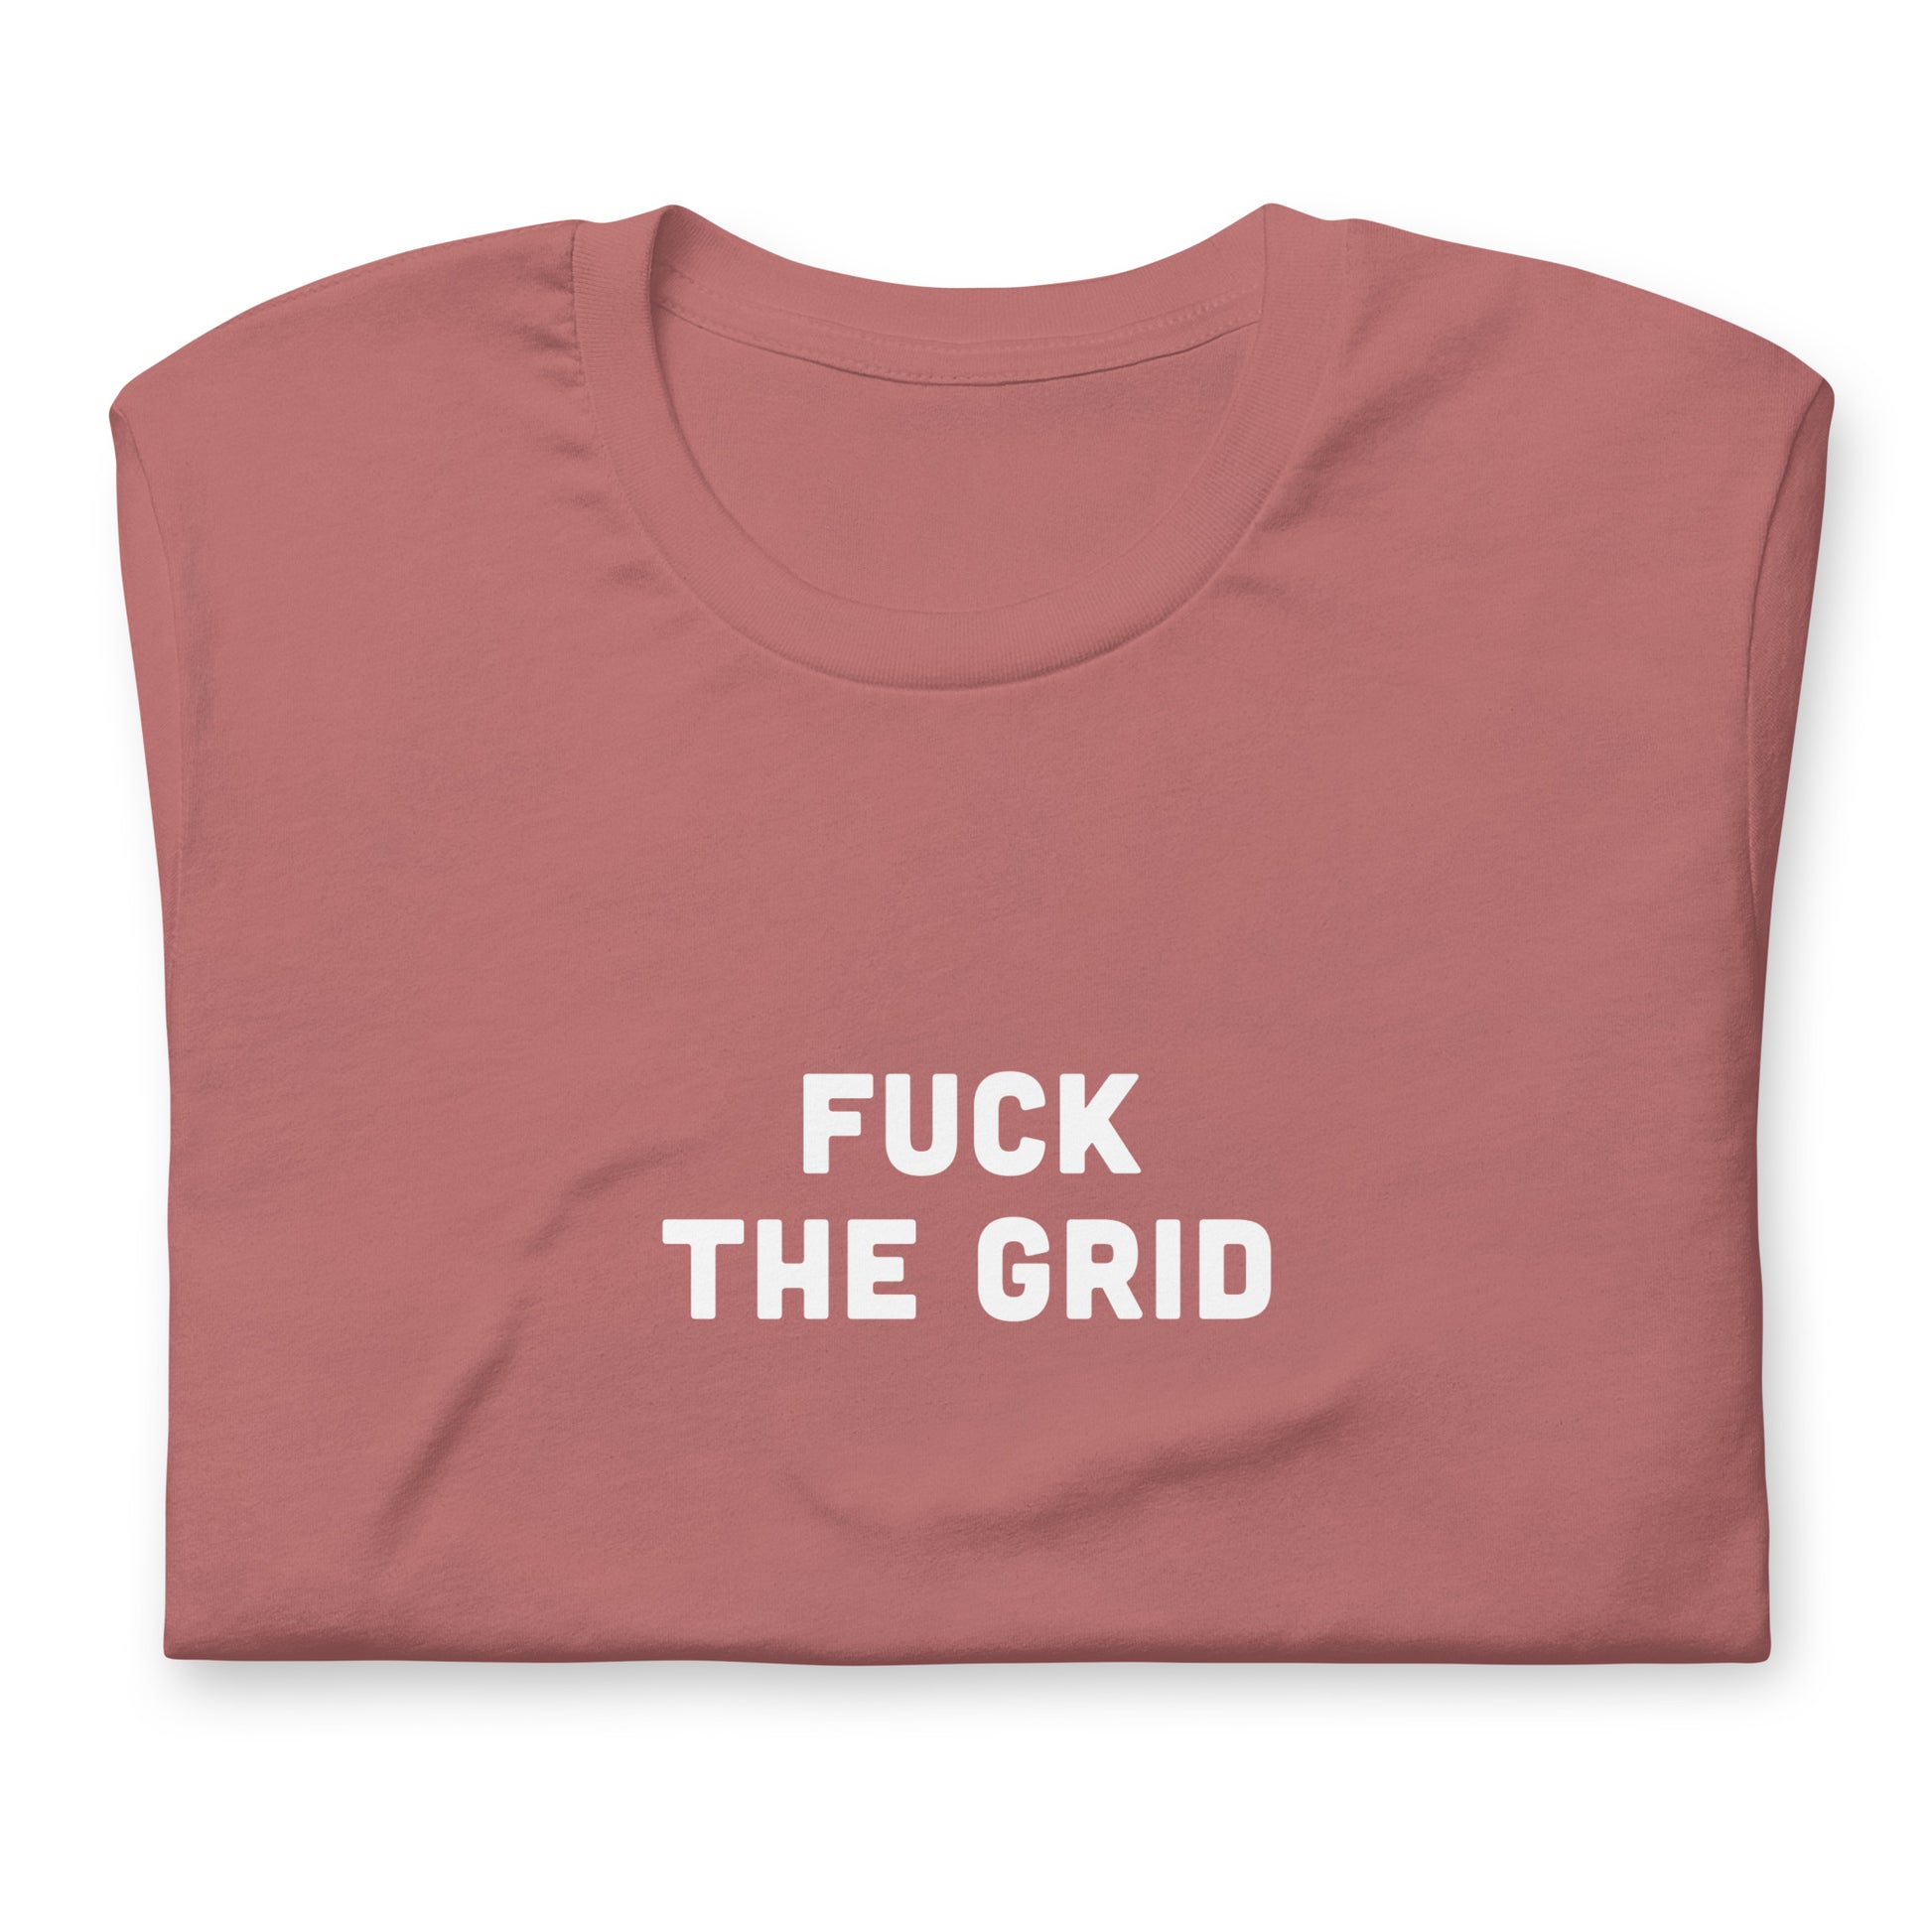 Fuck The Grid T-Shirt Size 2XL Color Navy